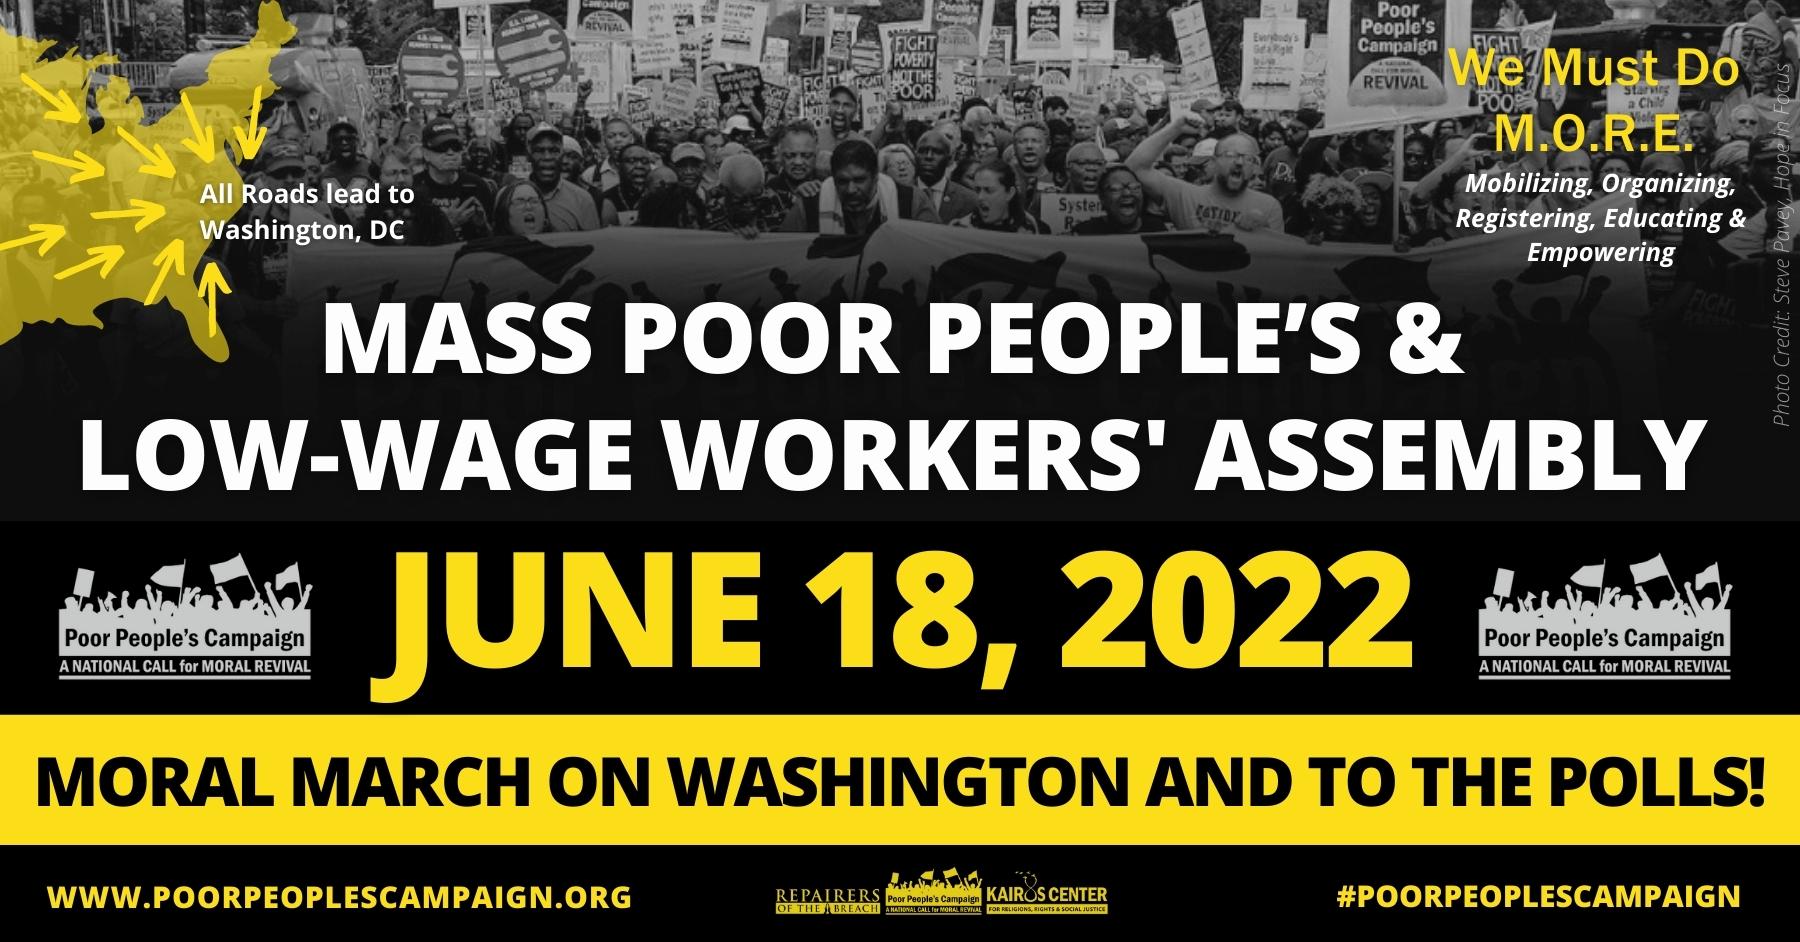 NASW is an Official Partner of the Poor People’s Campaign